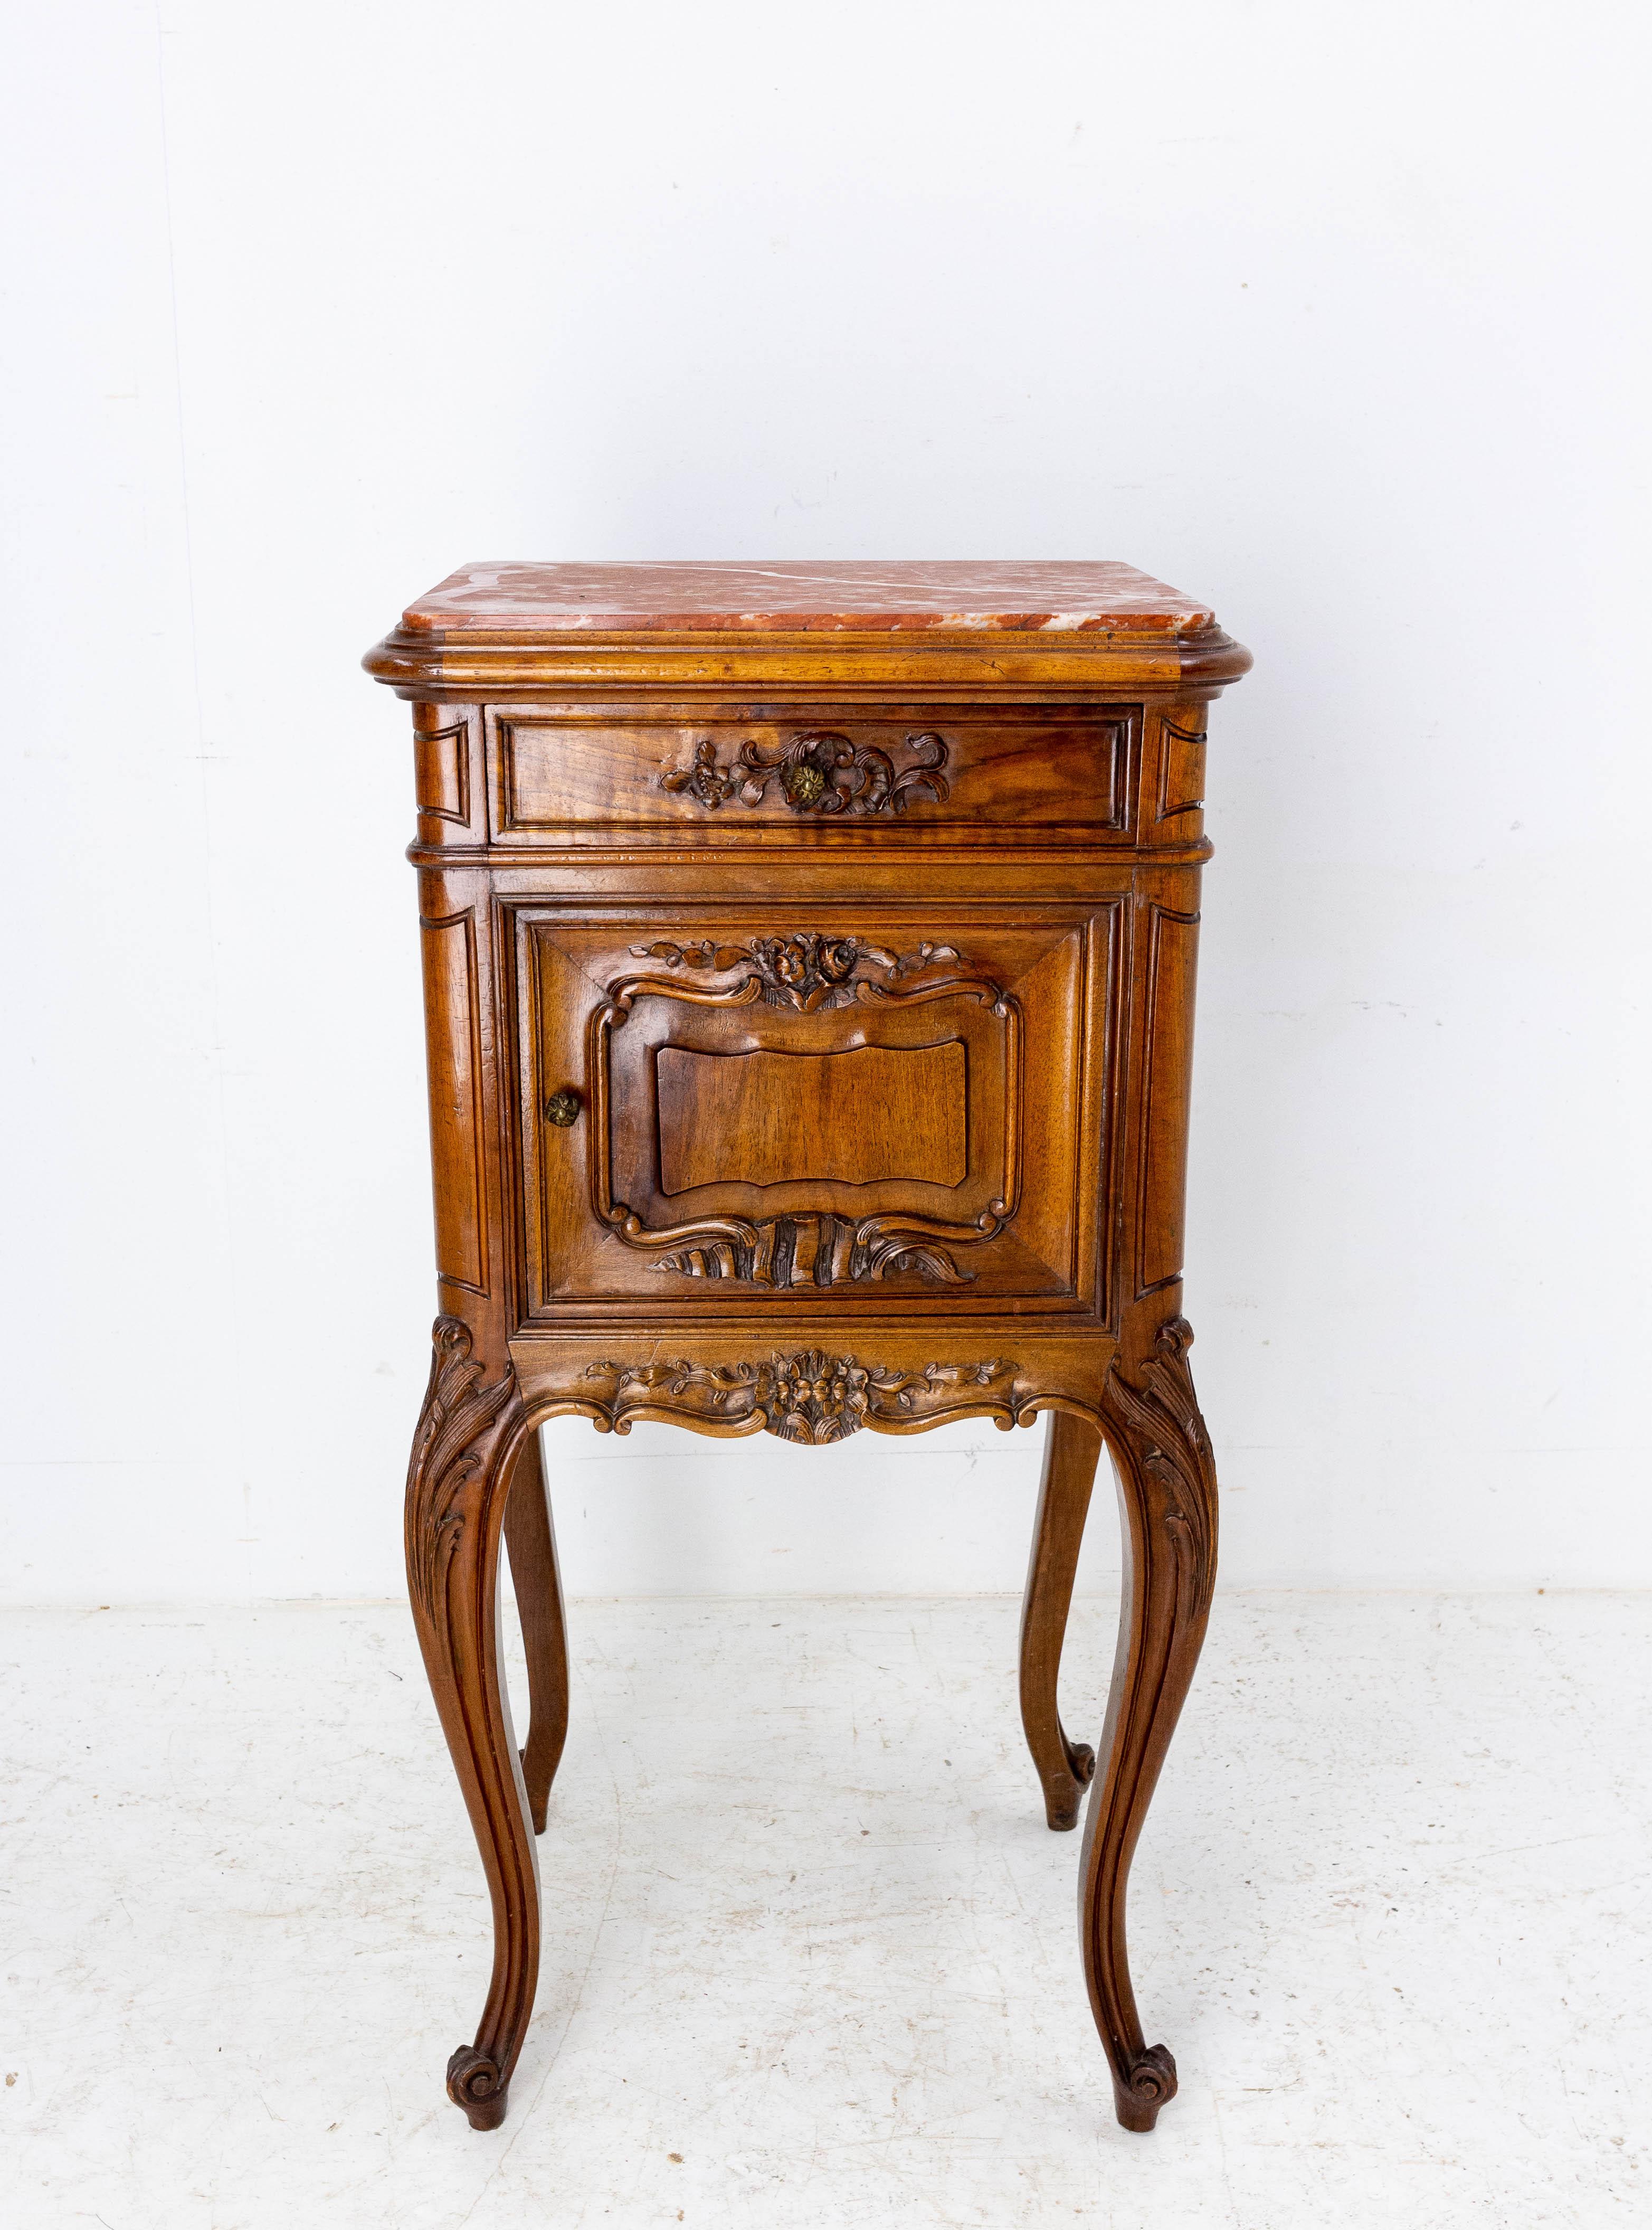 French side cabinet Louis XV style nightstand
Mid-century
Walnut and marble top bedside table
Carved with vegetal and floral motifs.
Very good condition.

Shipping: 
L34,5 P39,5 H87,5 19 Kg.